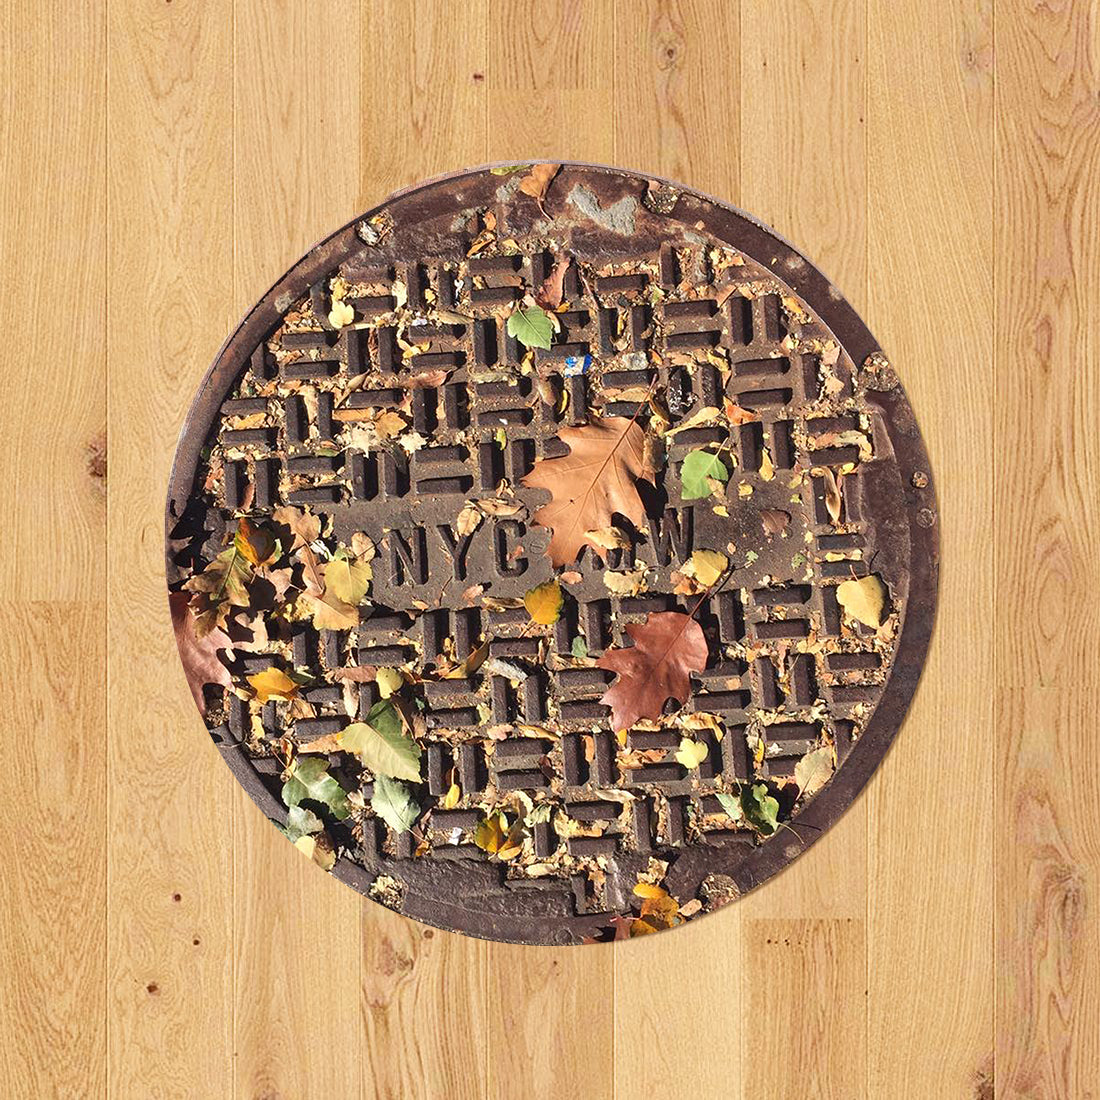 NYC SERIES - Sewer Cover Doormat, Trivet, Coaster - Fall - New York, NY